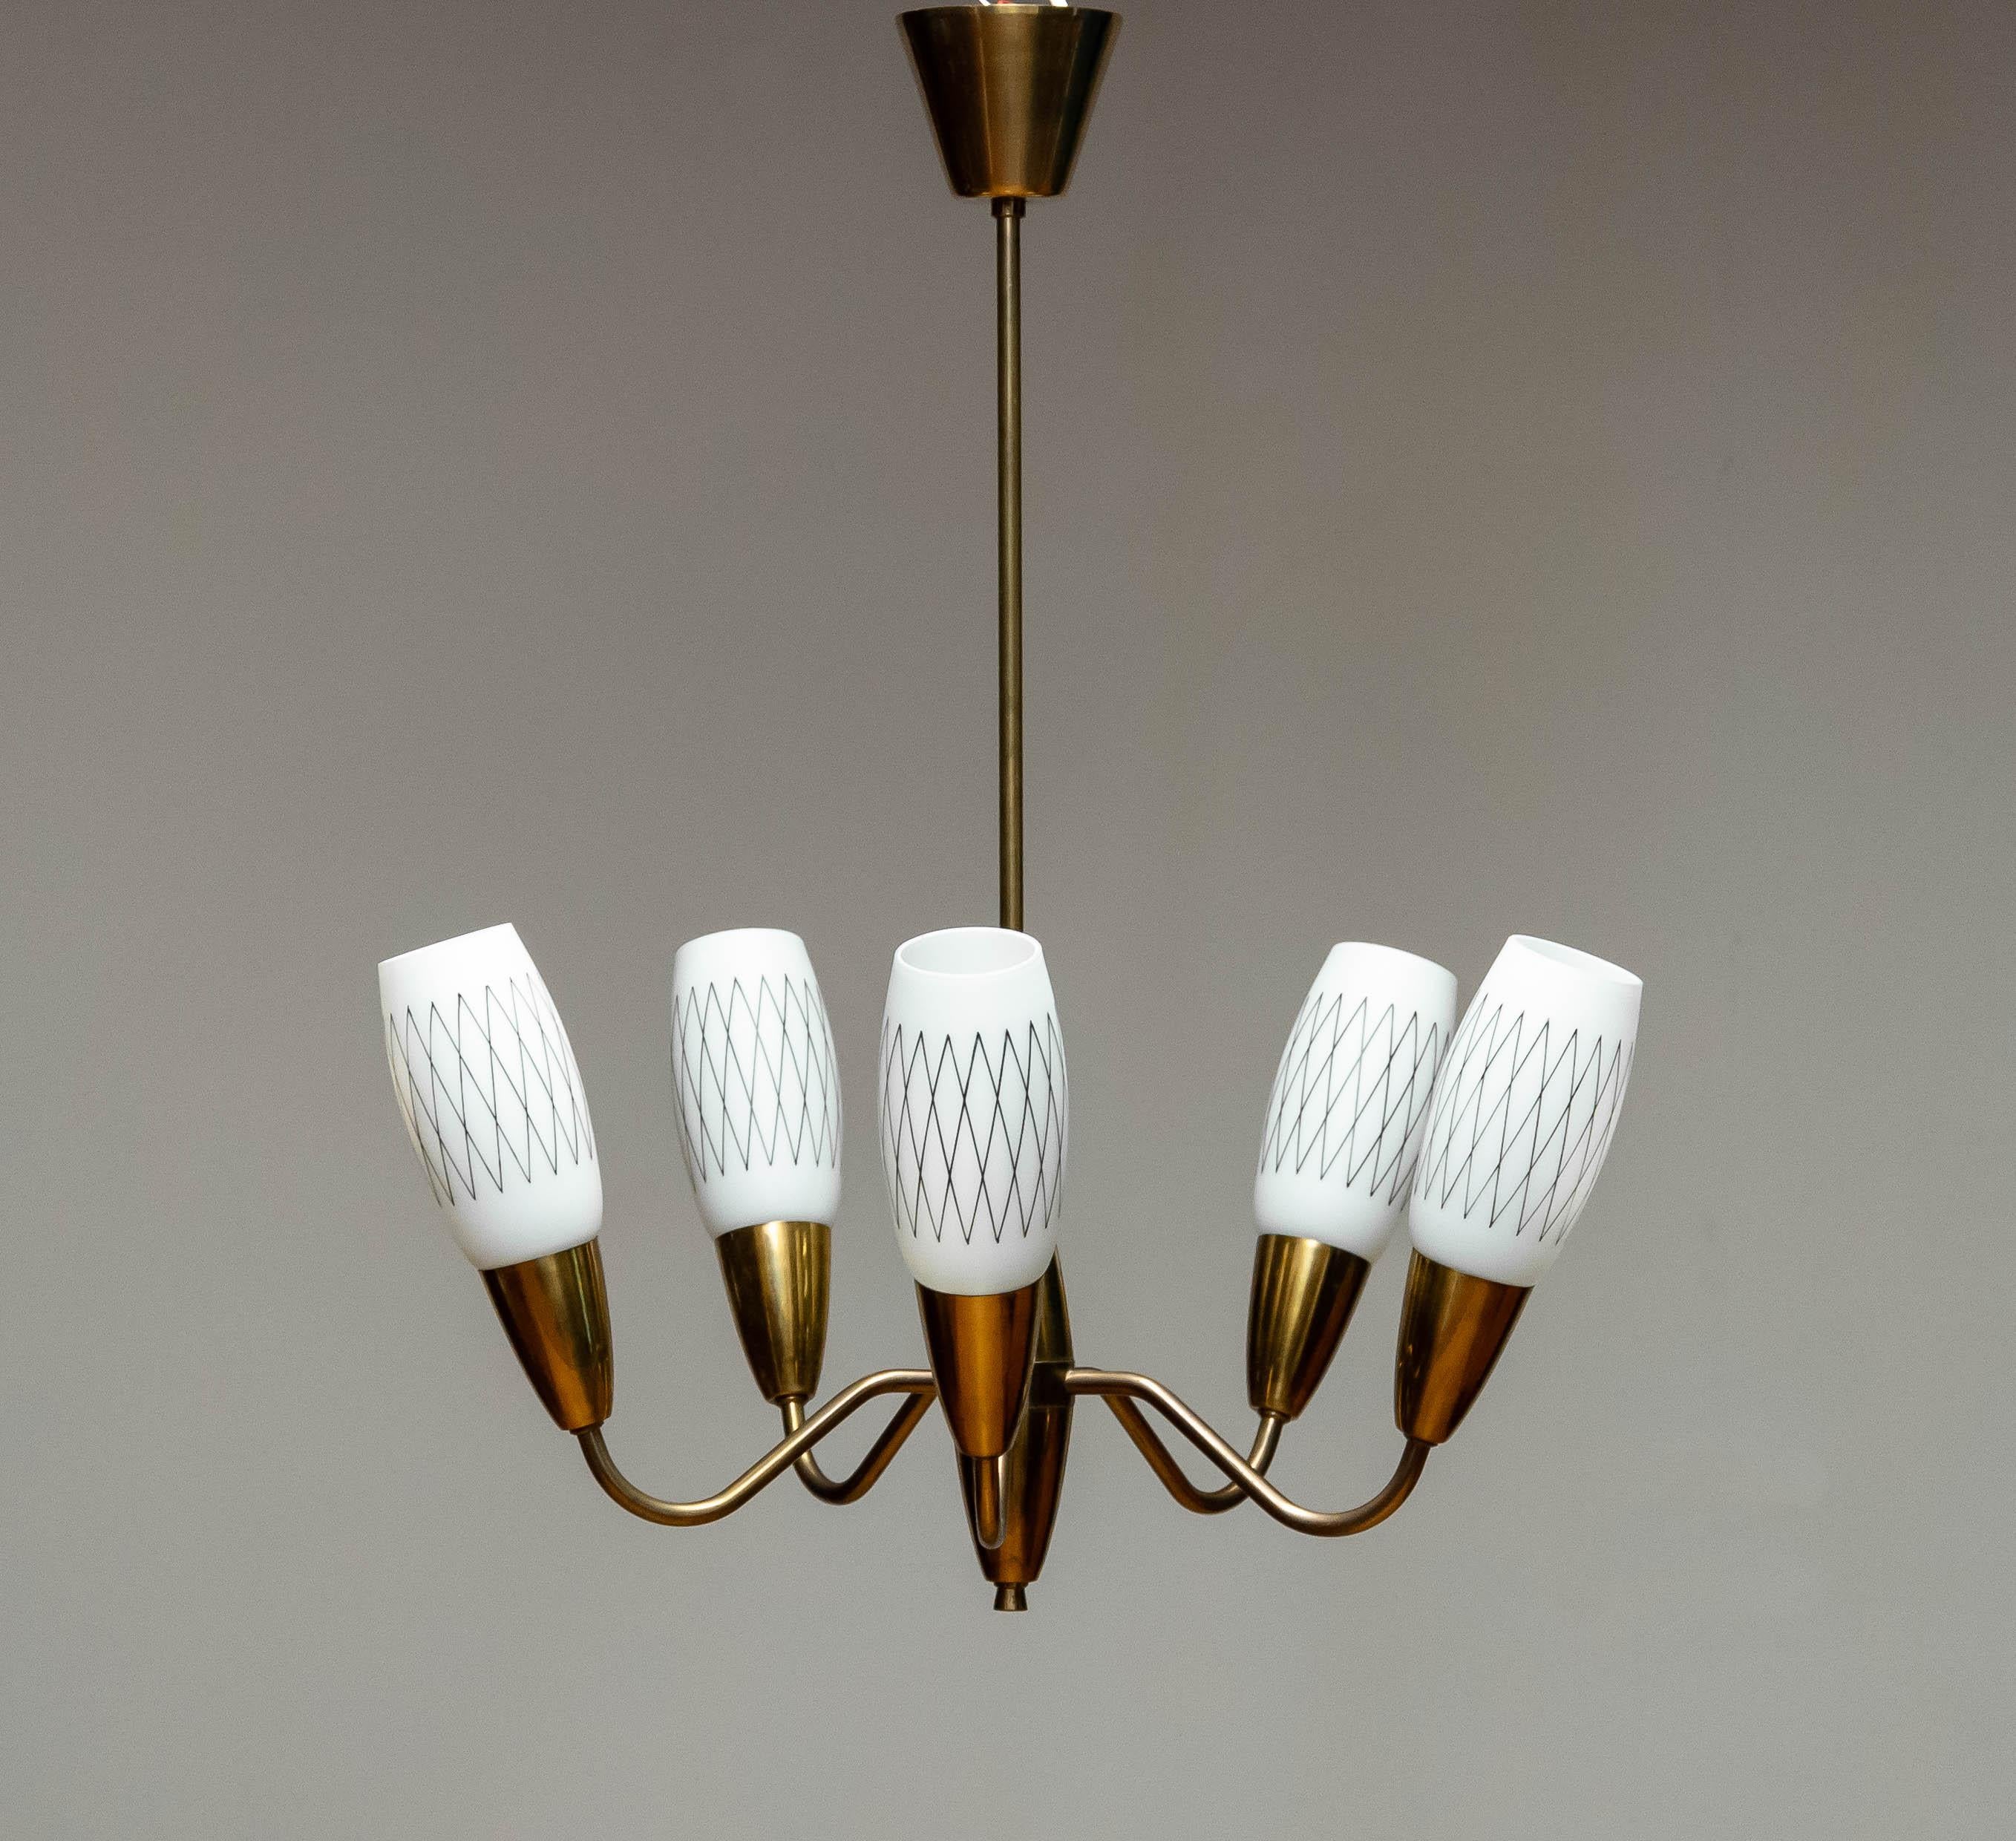 Elegant Swedish Pendant / Chandelier In Brass And Opal Art Glass From The 1950s  For Sale 3